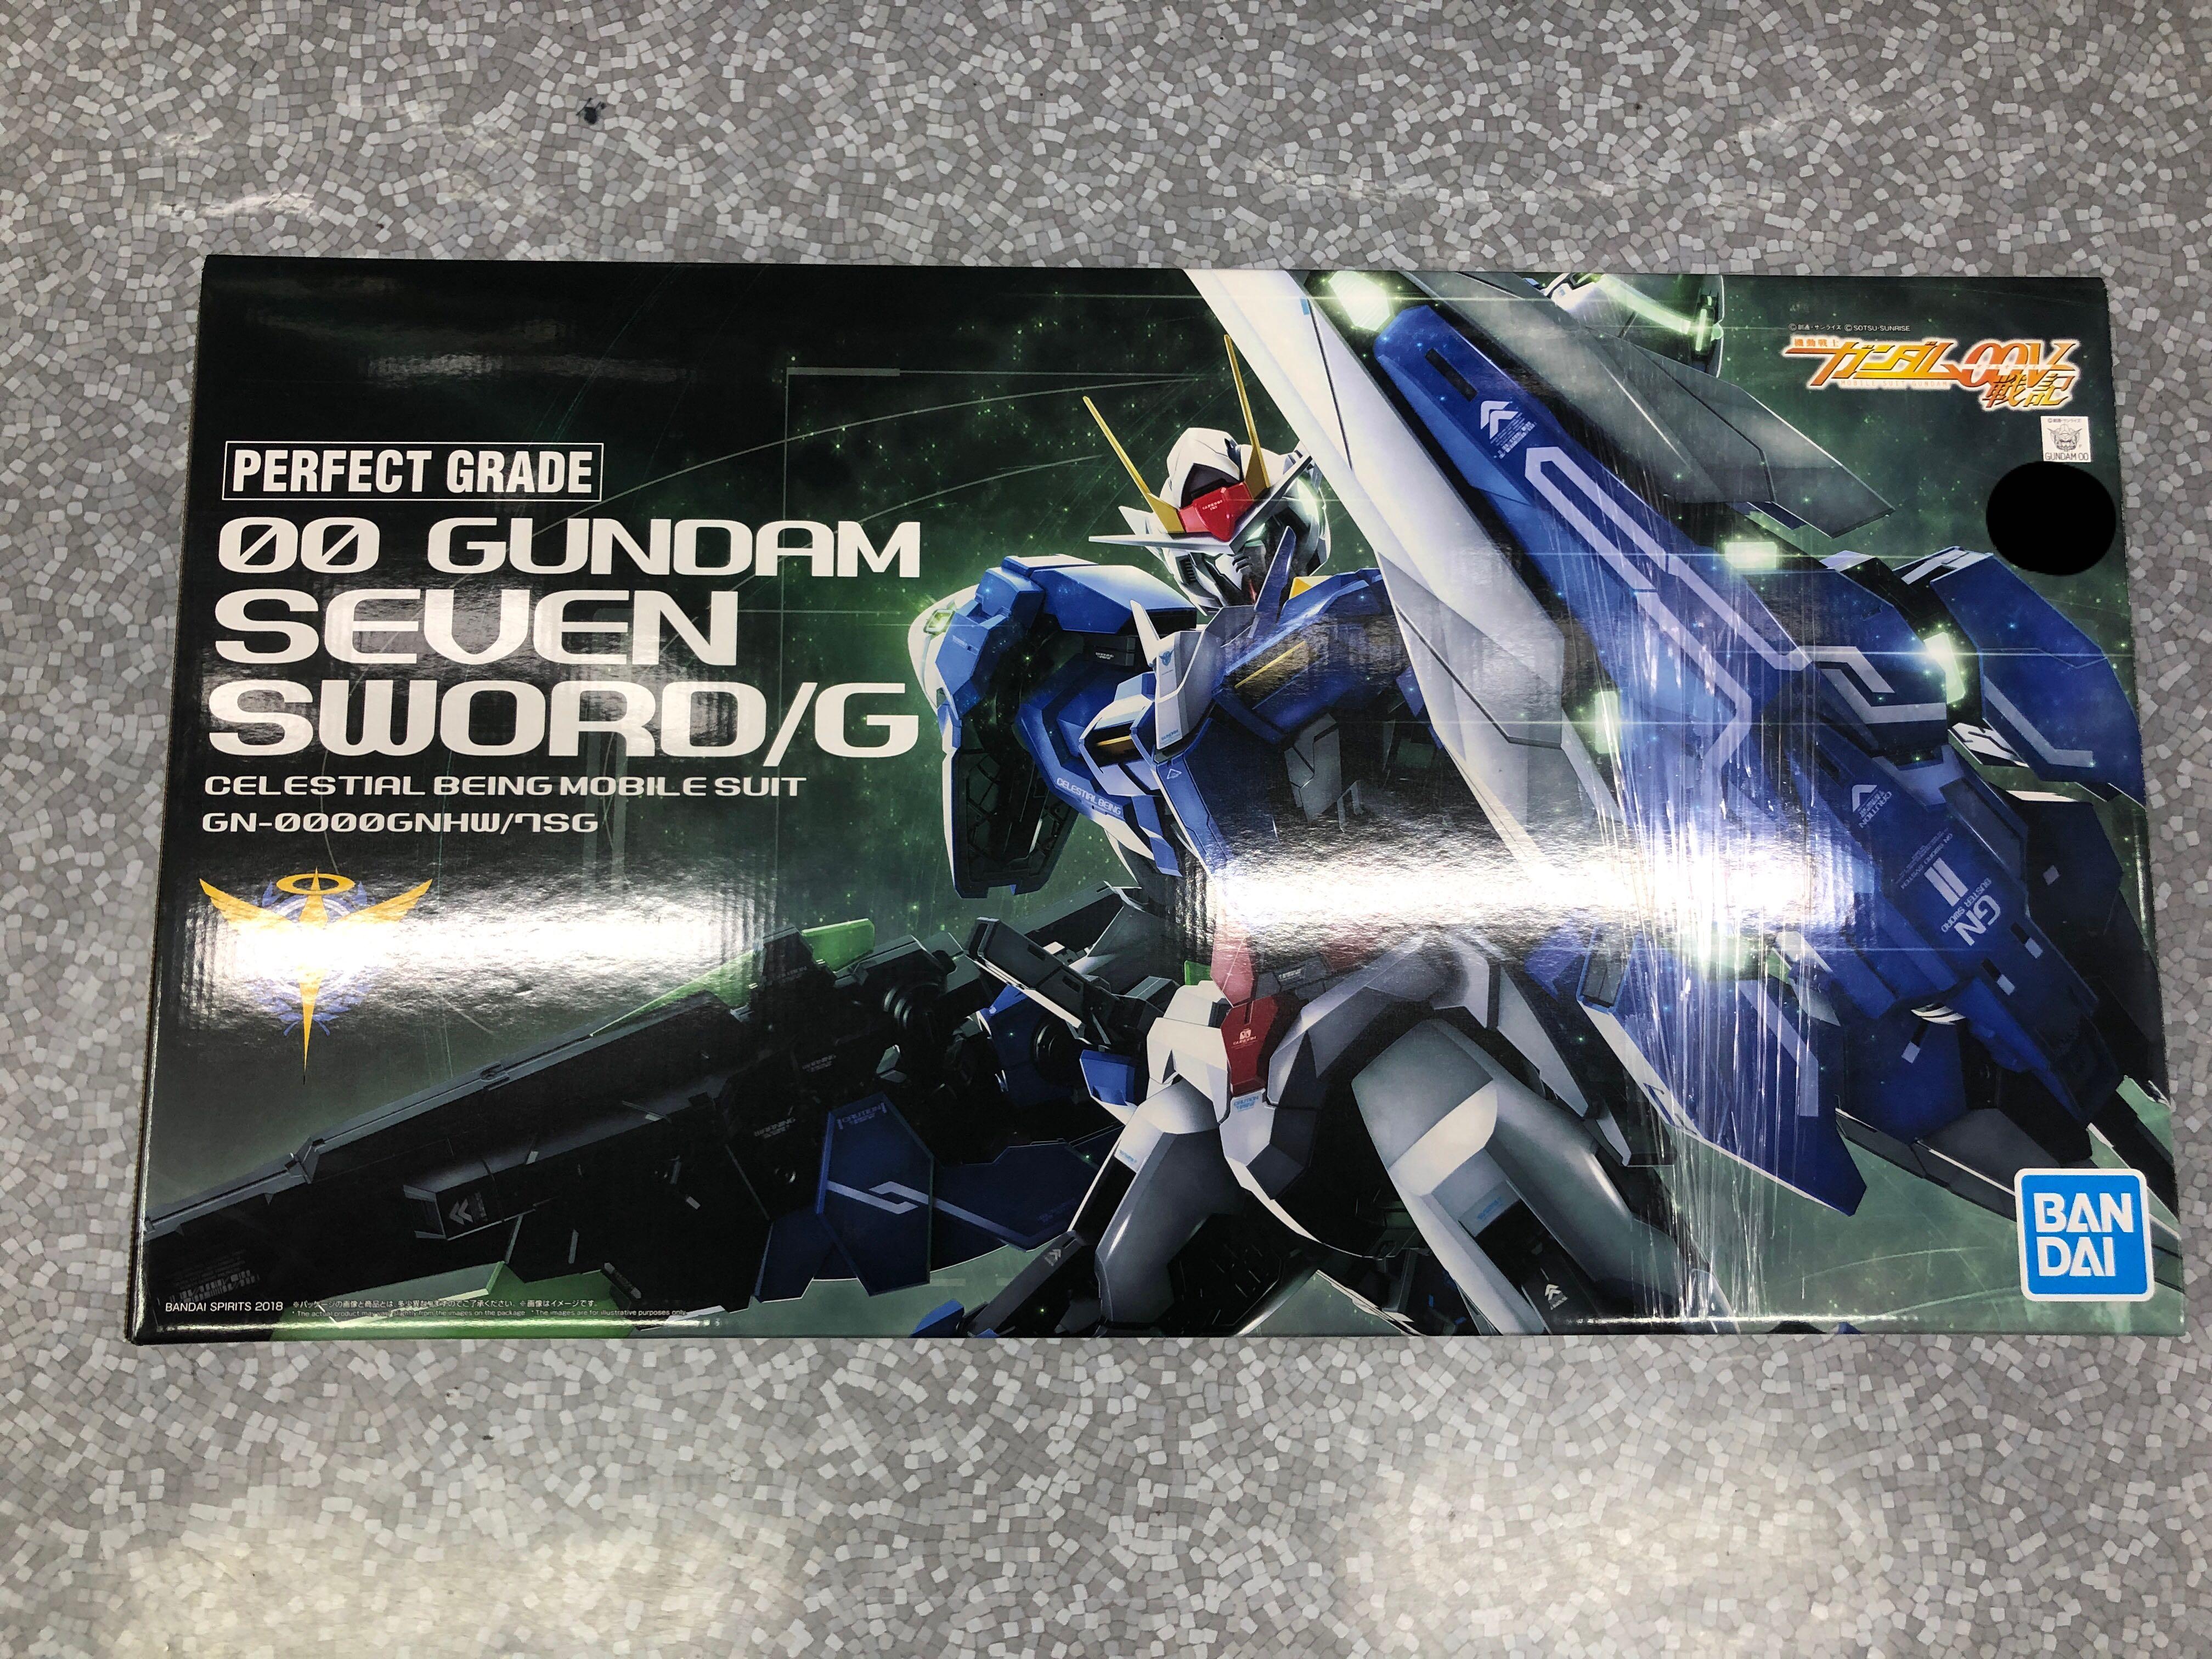 Bandai Pg Oo Gundam Seven Sword G Toys Games Others On Carousell